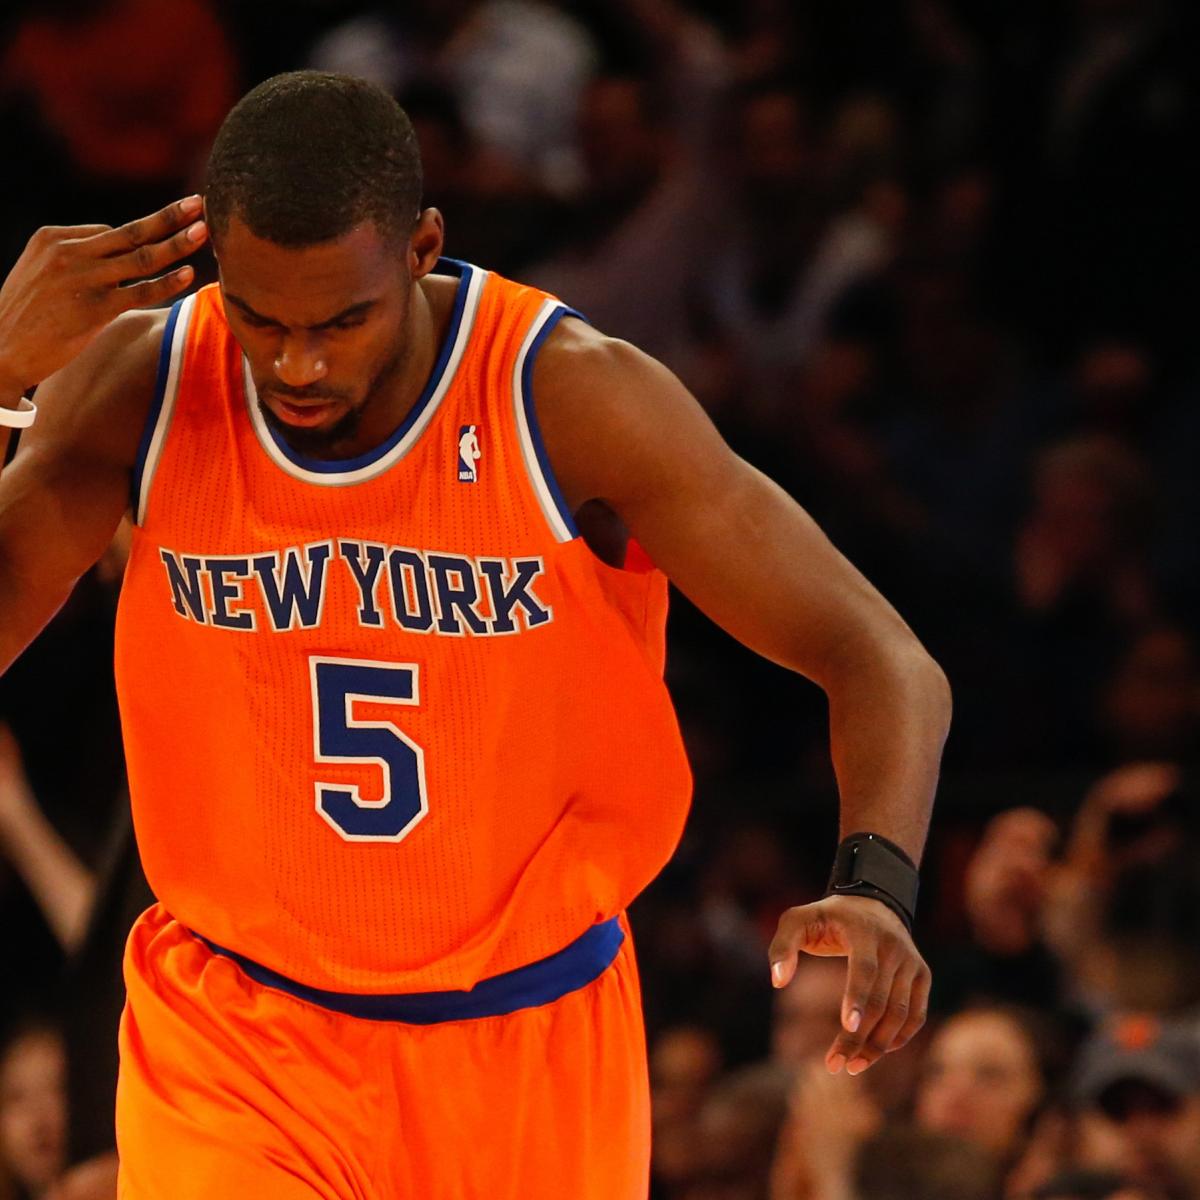 Tim Hardaway Jr. opens up about expectations for himself going